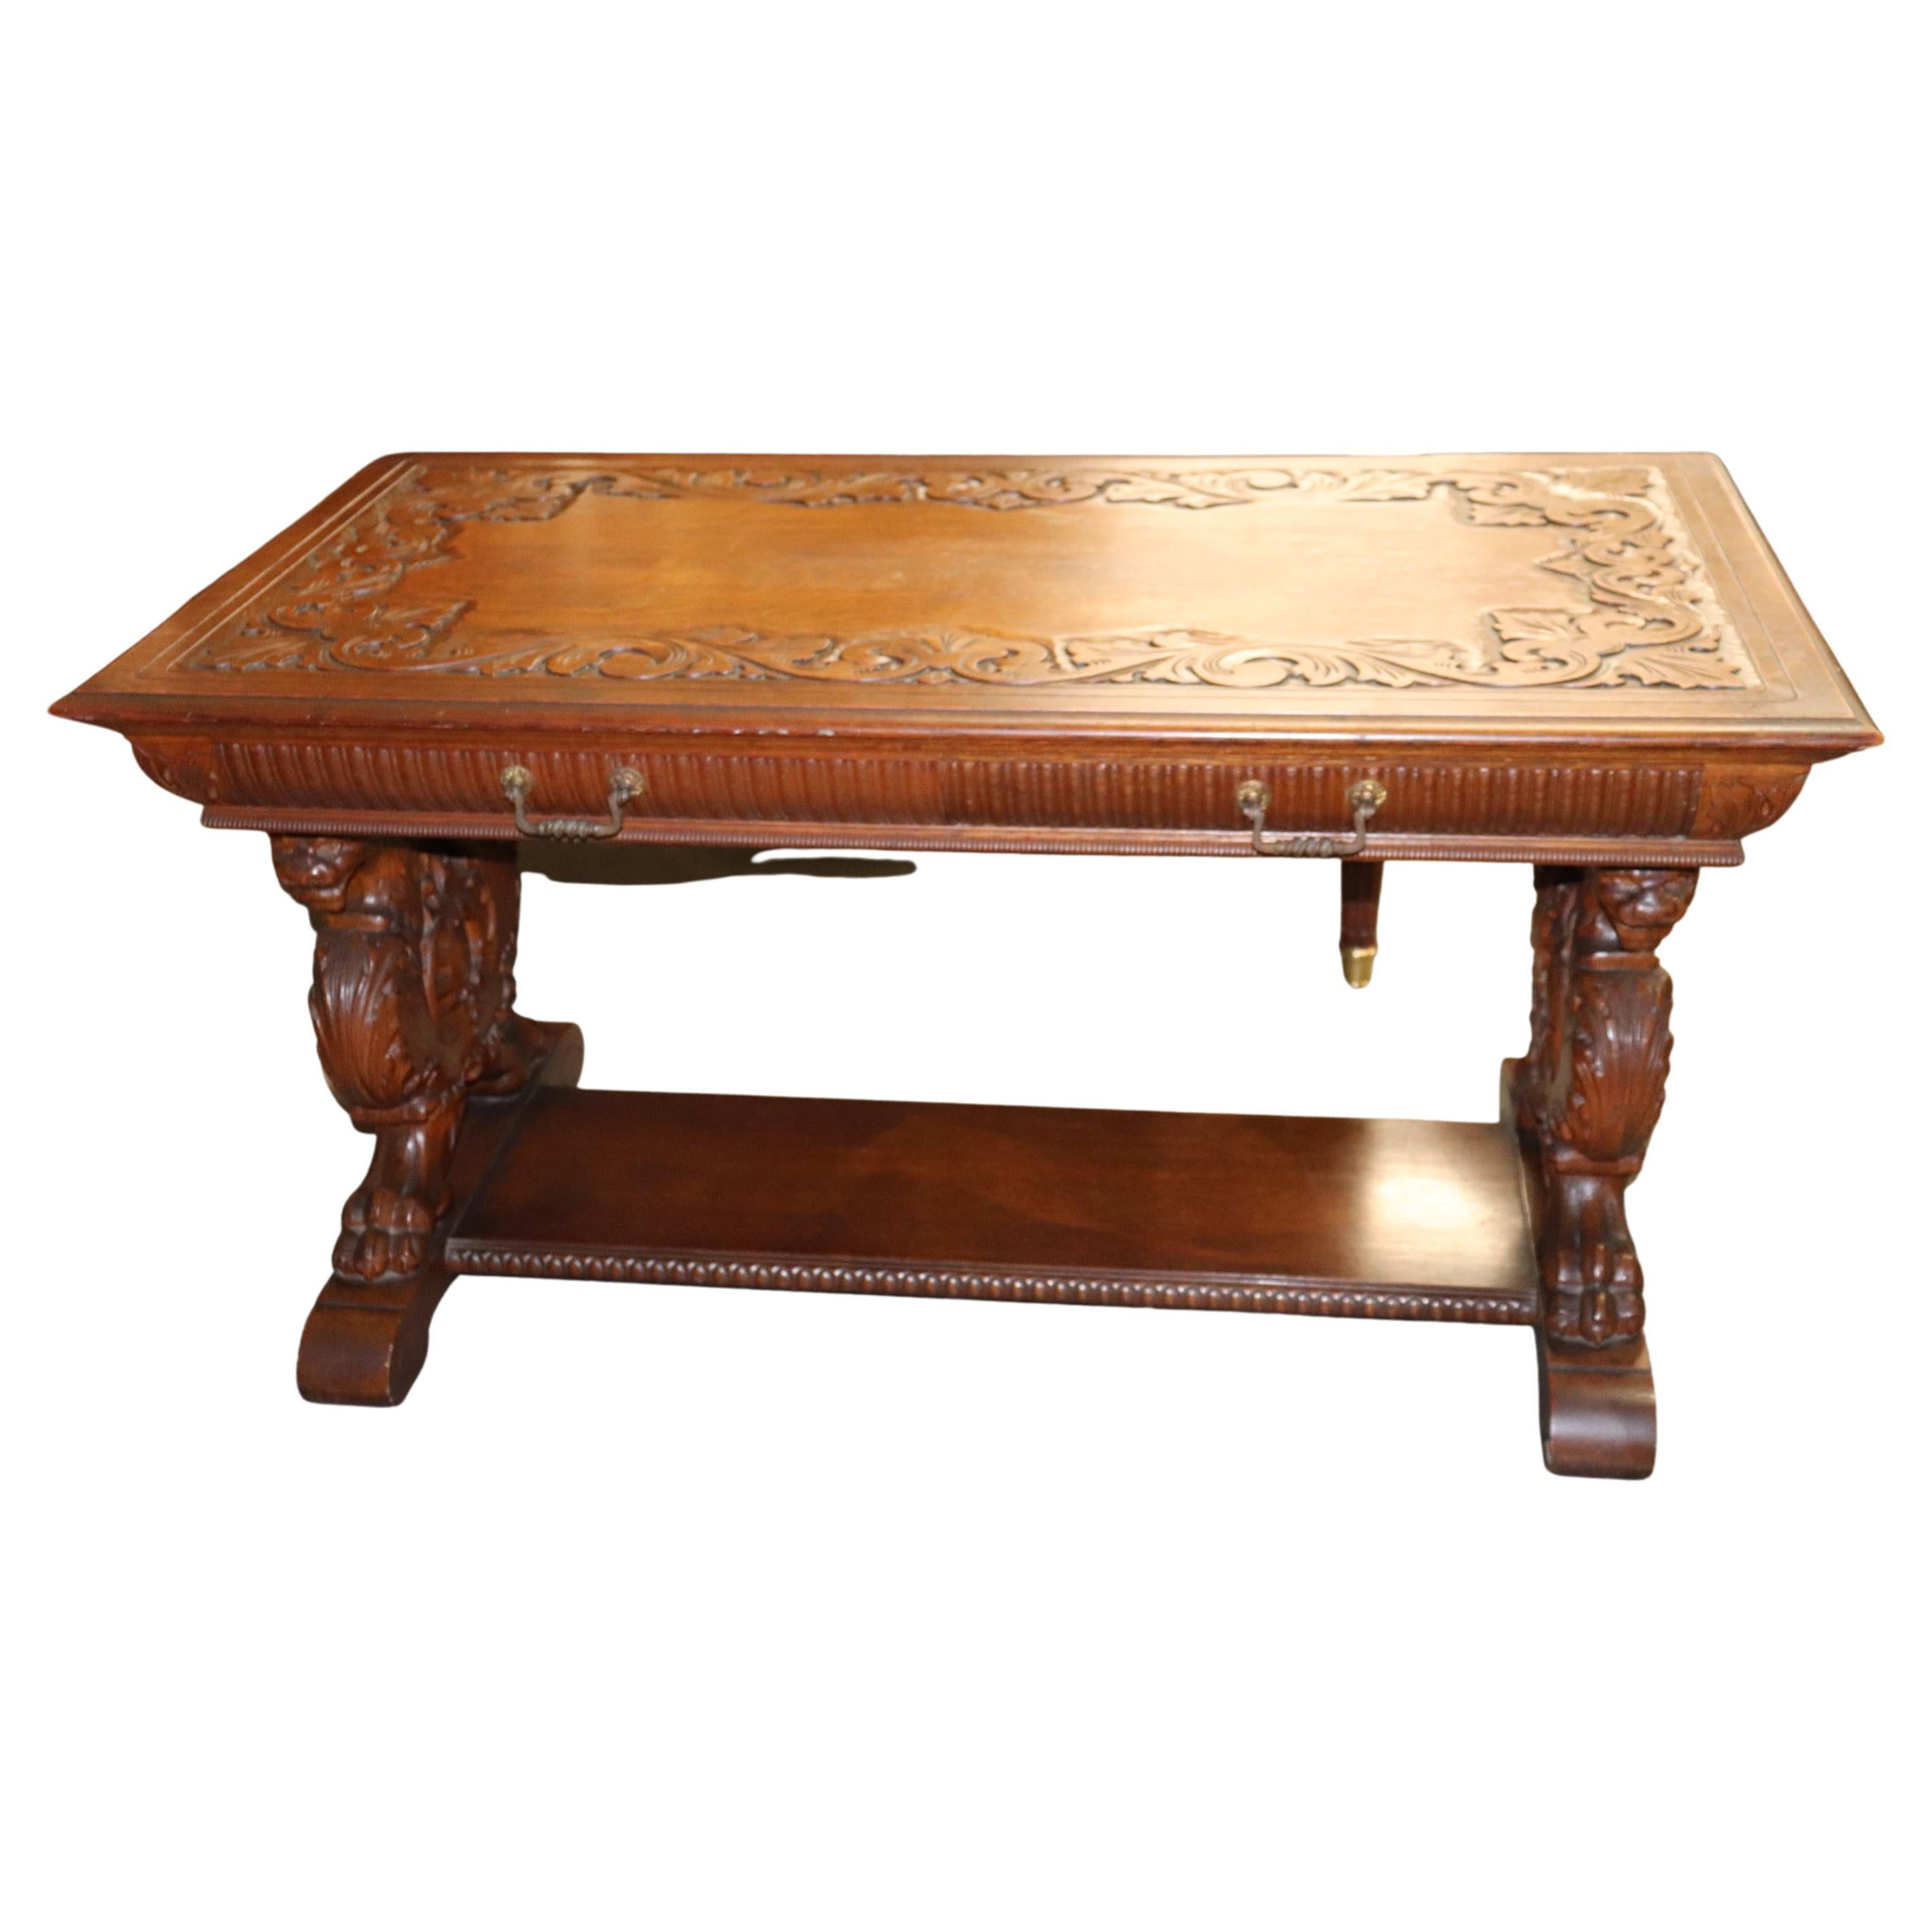 This is an iconic RJ Horner quarter sawn oak partners desk. The desk has one working drawer on each side like these desk all do. One is false and one is working on the opposing side. The desk is in very good condition and has beautifully carved